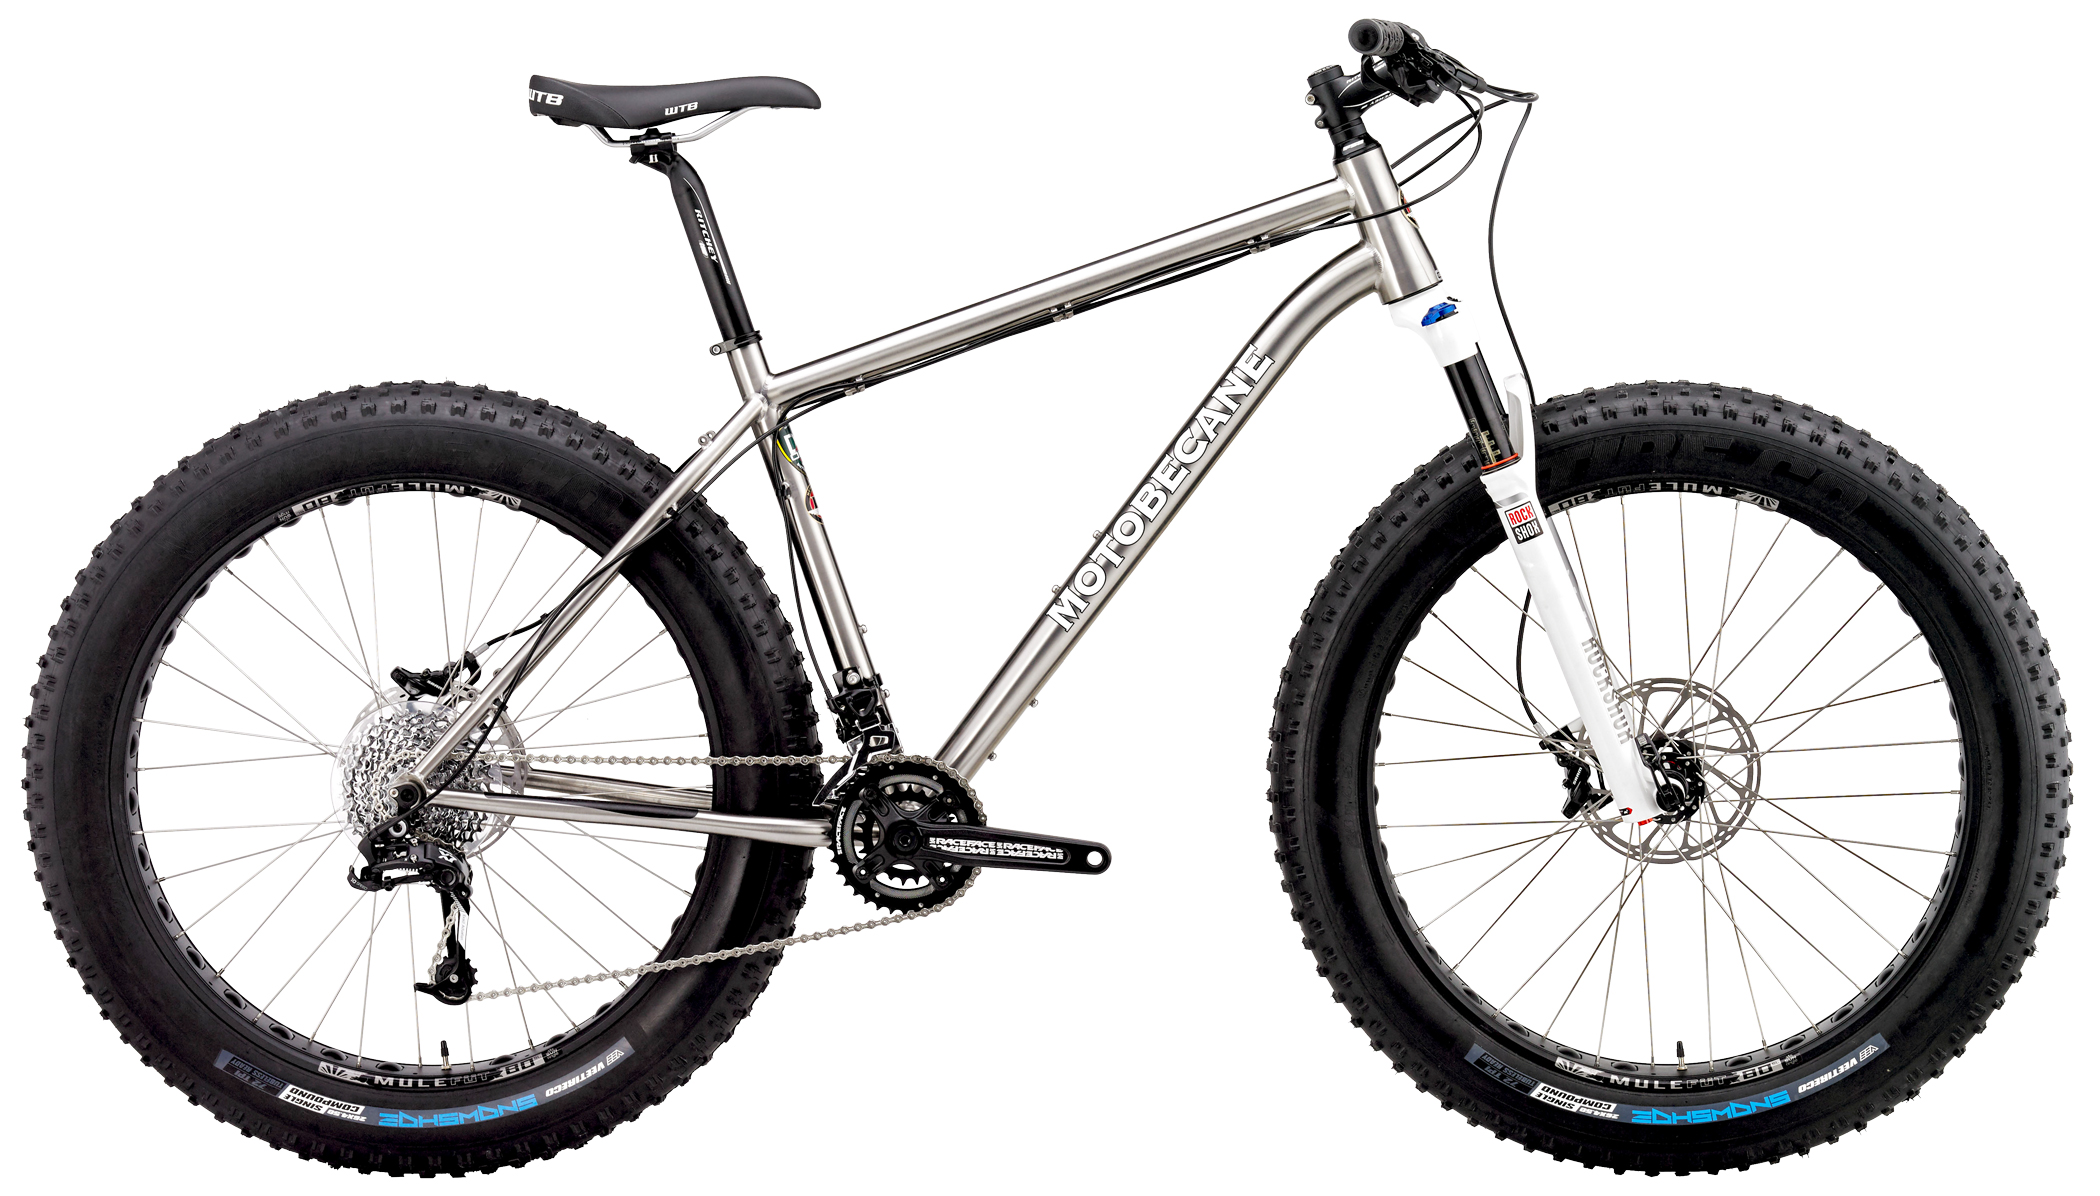 Save up to 60% off new Titanium Rockshox Bluto Equipped Fat Bikes and ...